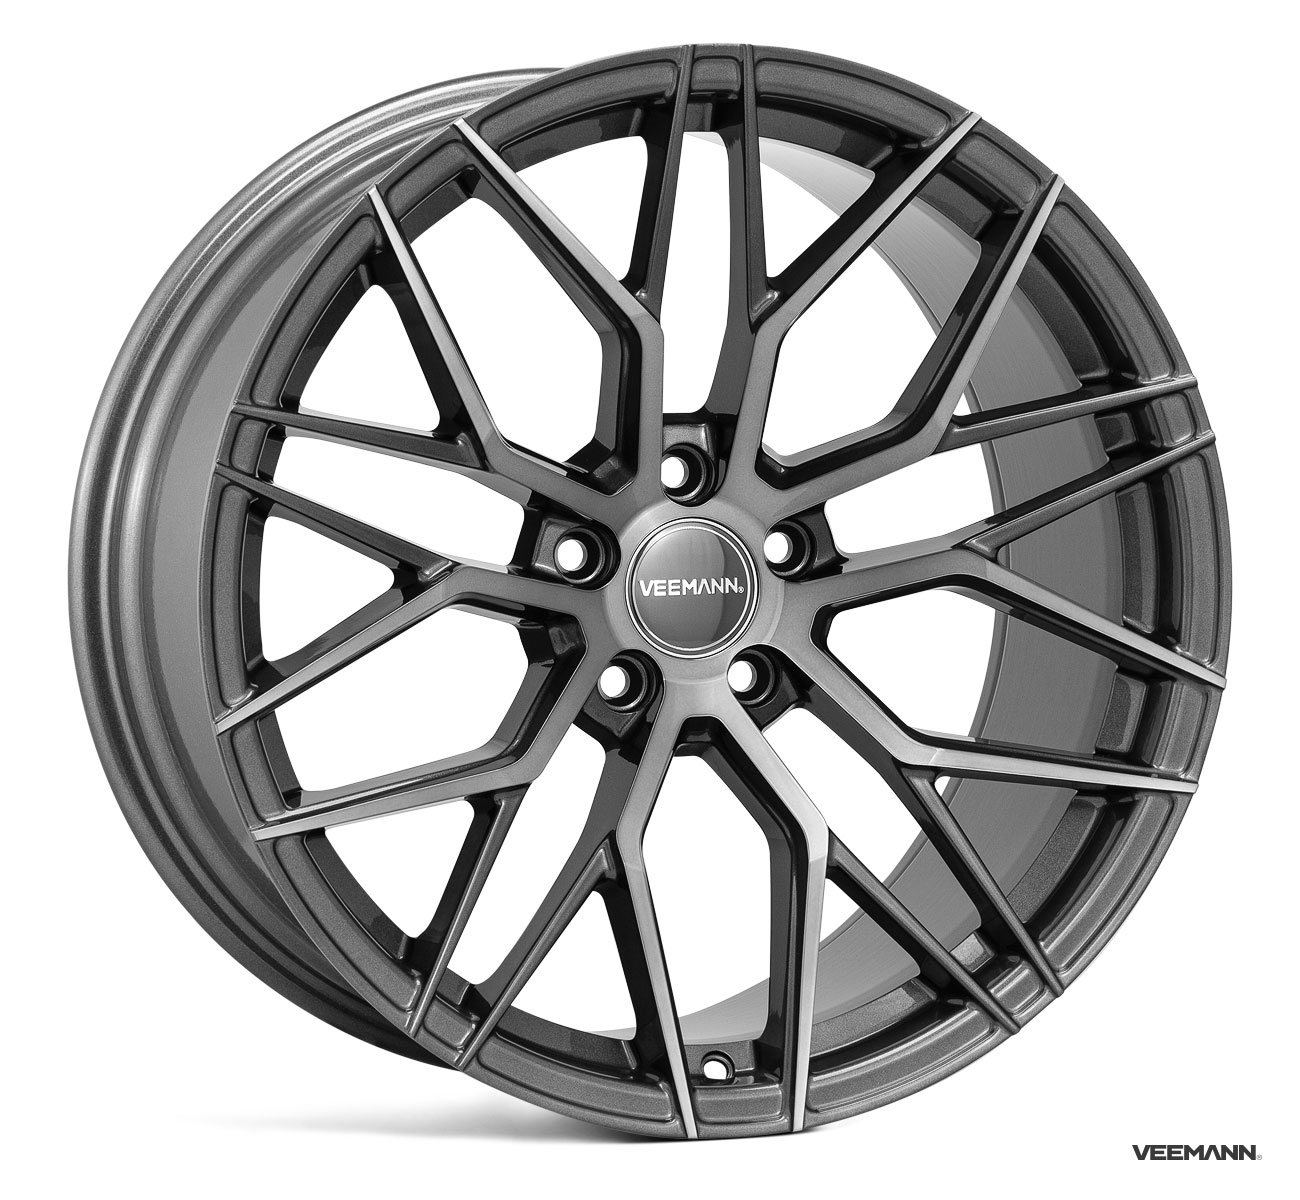 NEW 22" VEEMANN VC520 ALLOY WHEELS IN DARK GRAPHITE POLISHED WITH WIDER" REARS